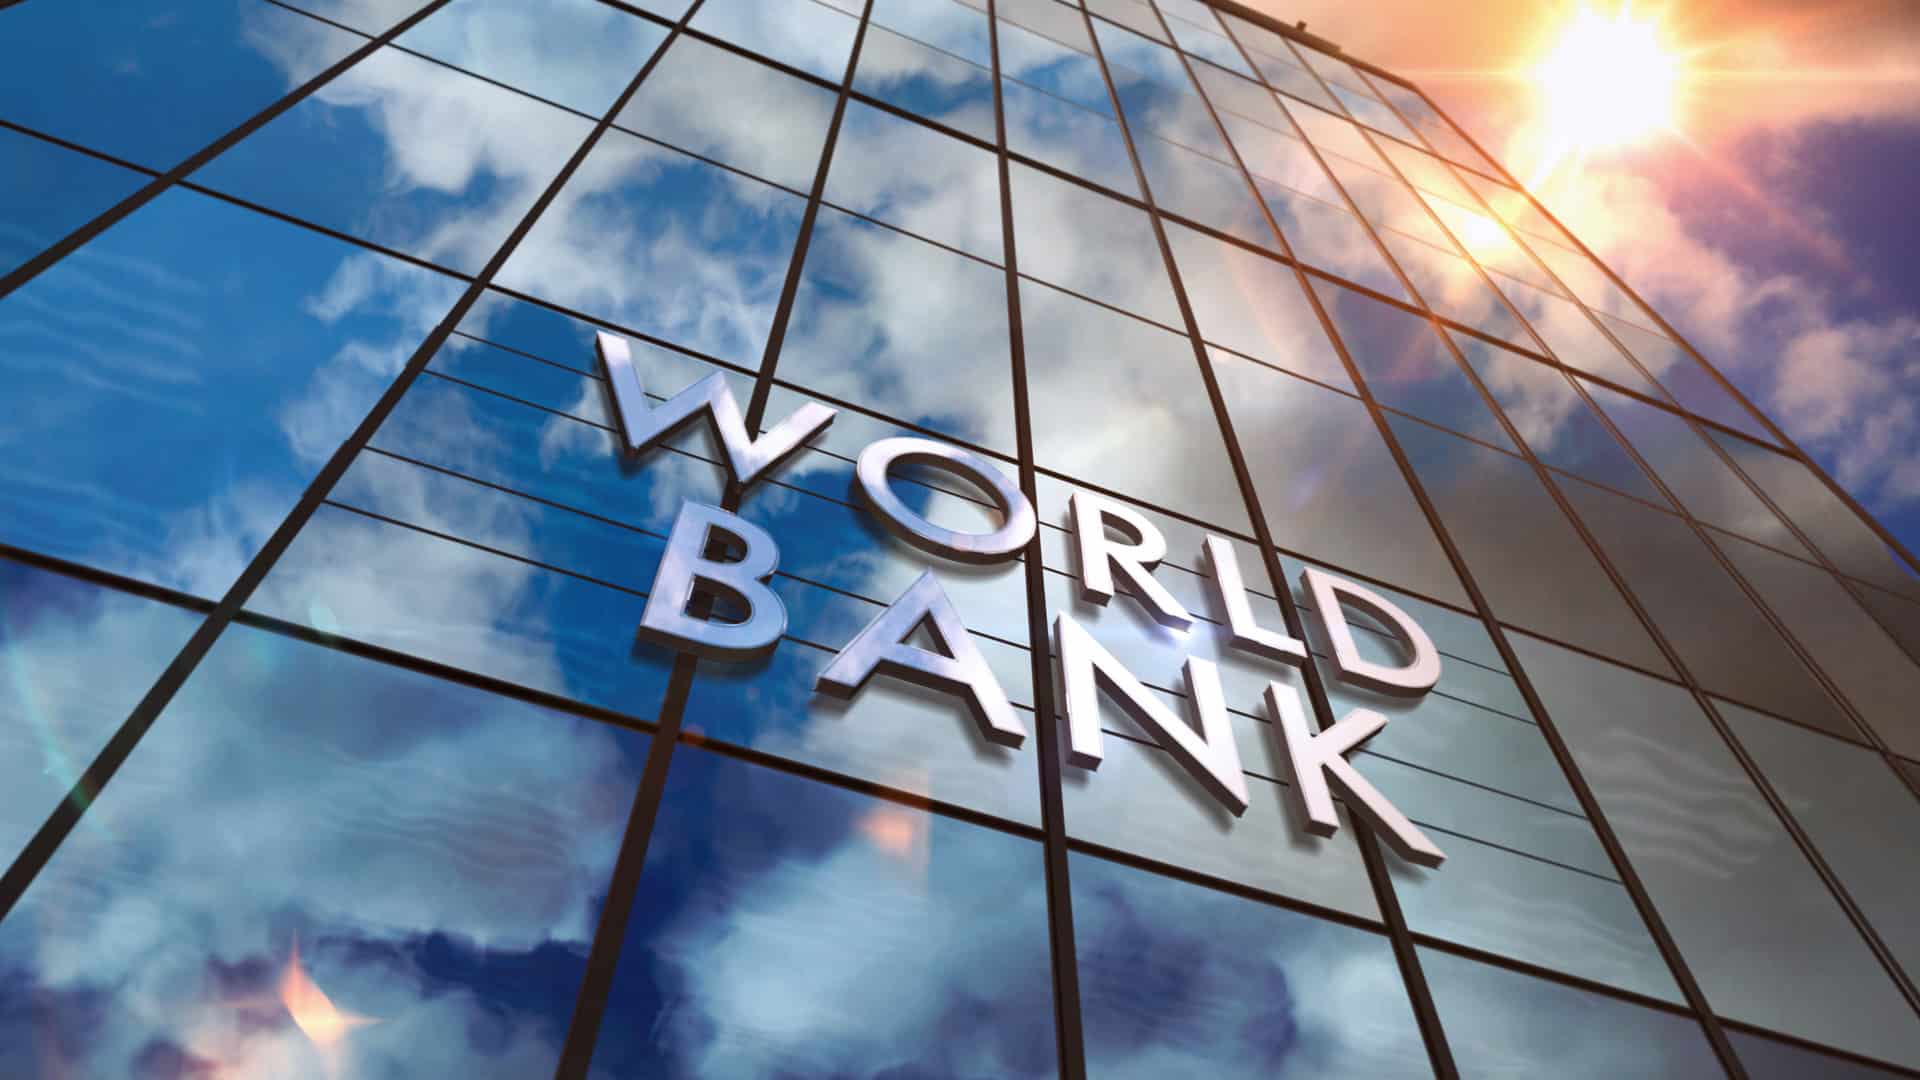 World Bank approves USD 255.5 million loan for better technical education in govt-run institutions